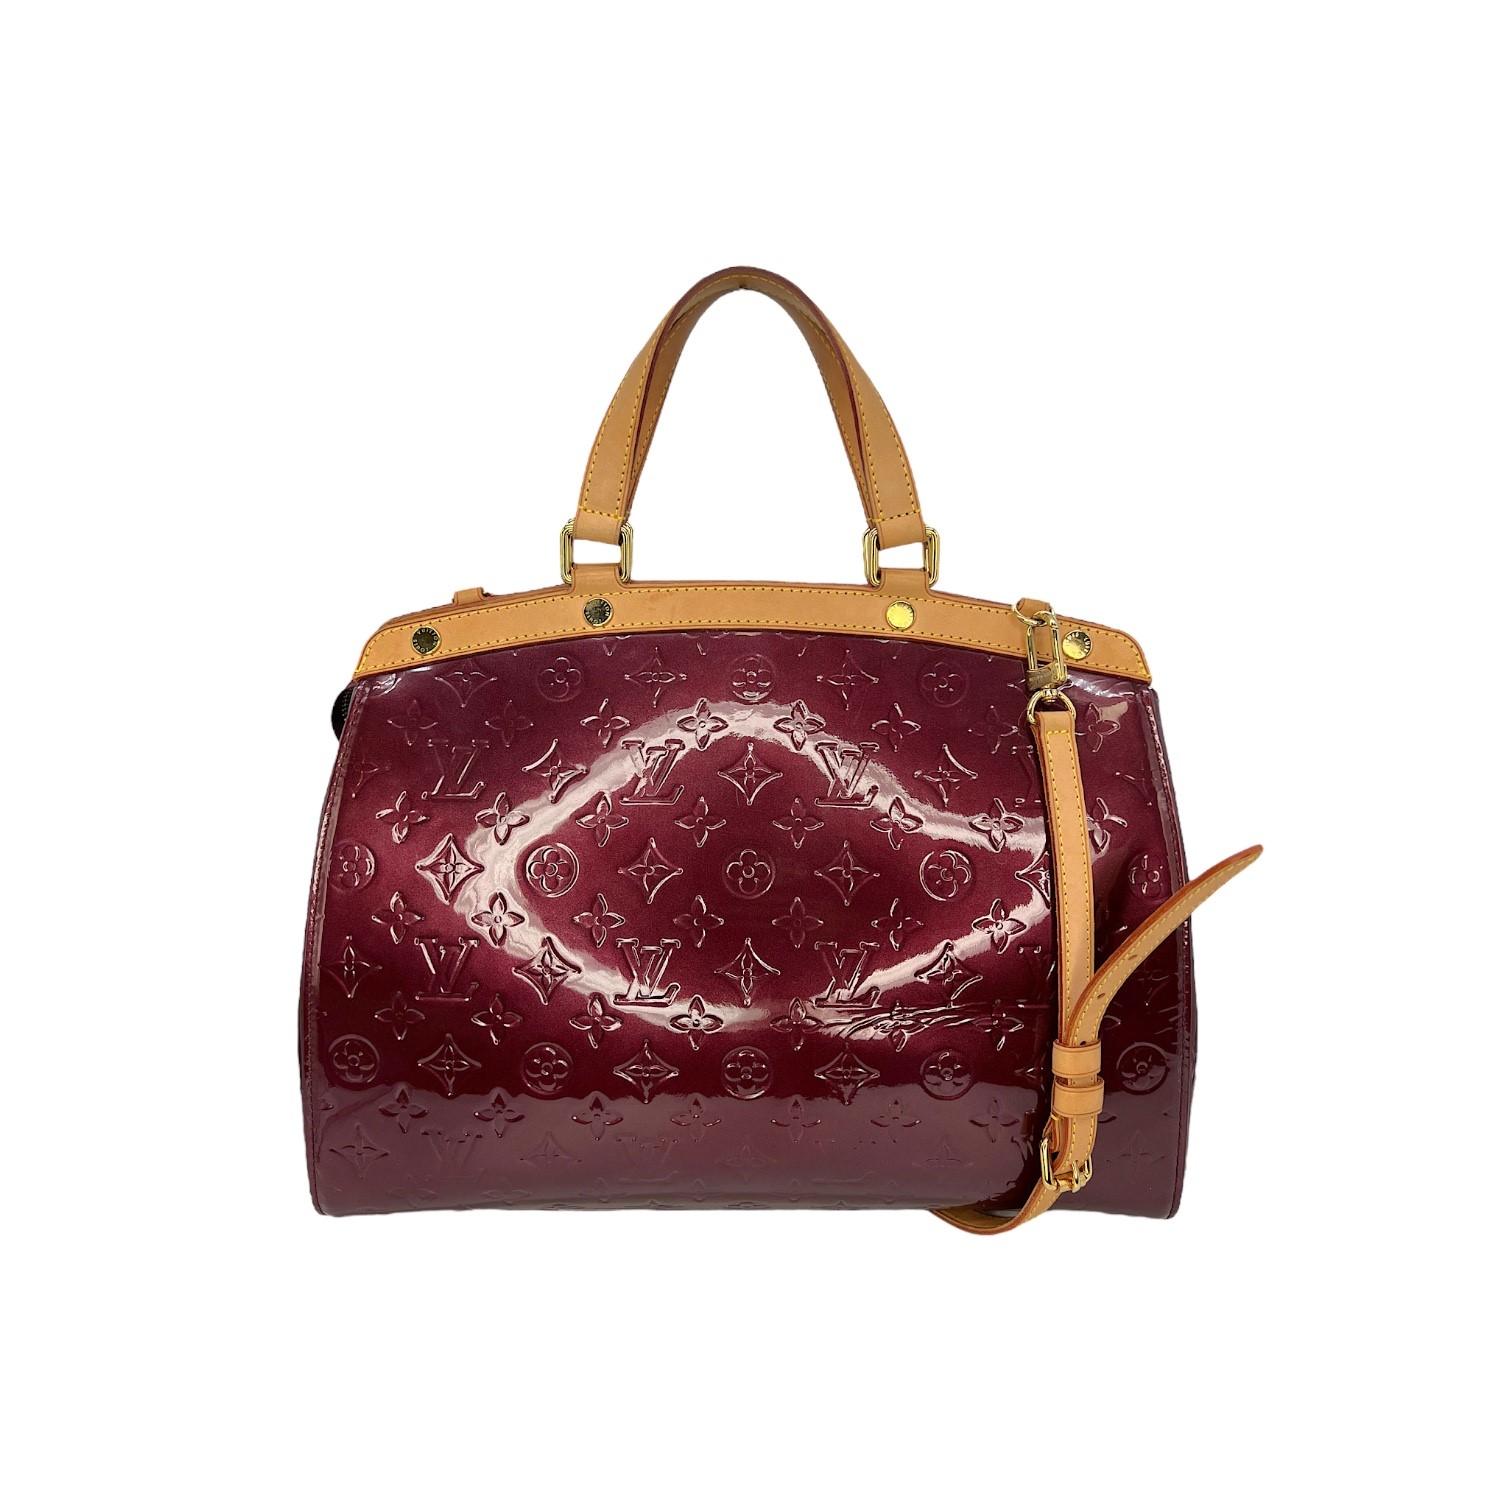 This Louis Vuitton Monogram Brea GM was made in France and exquisitely crafted of a burgundy-colored Louis Vuitton Monogram Vernis patent leather exterior with leather trimming and gold-tone hardware features. It has a zipper closure that opens to a